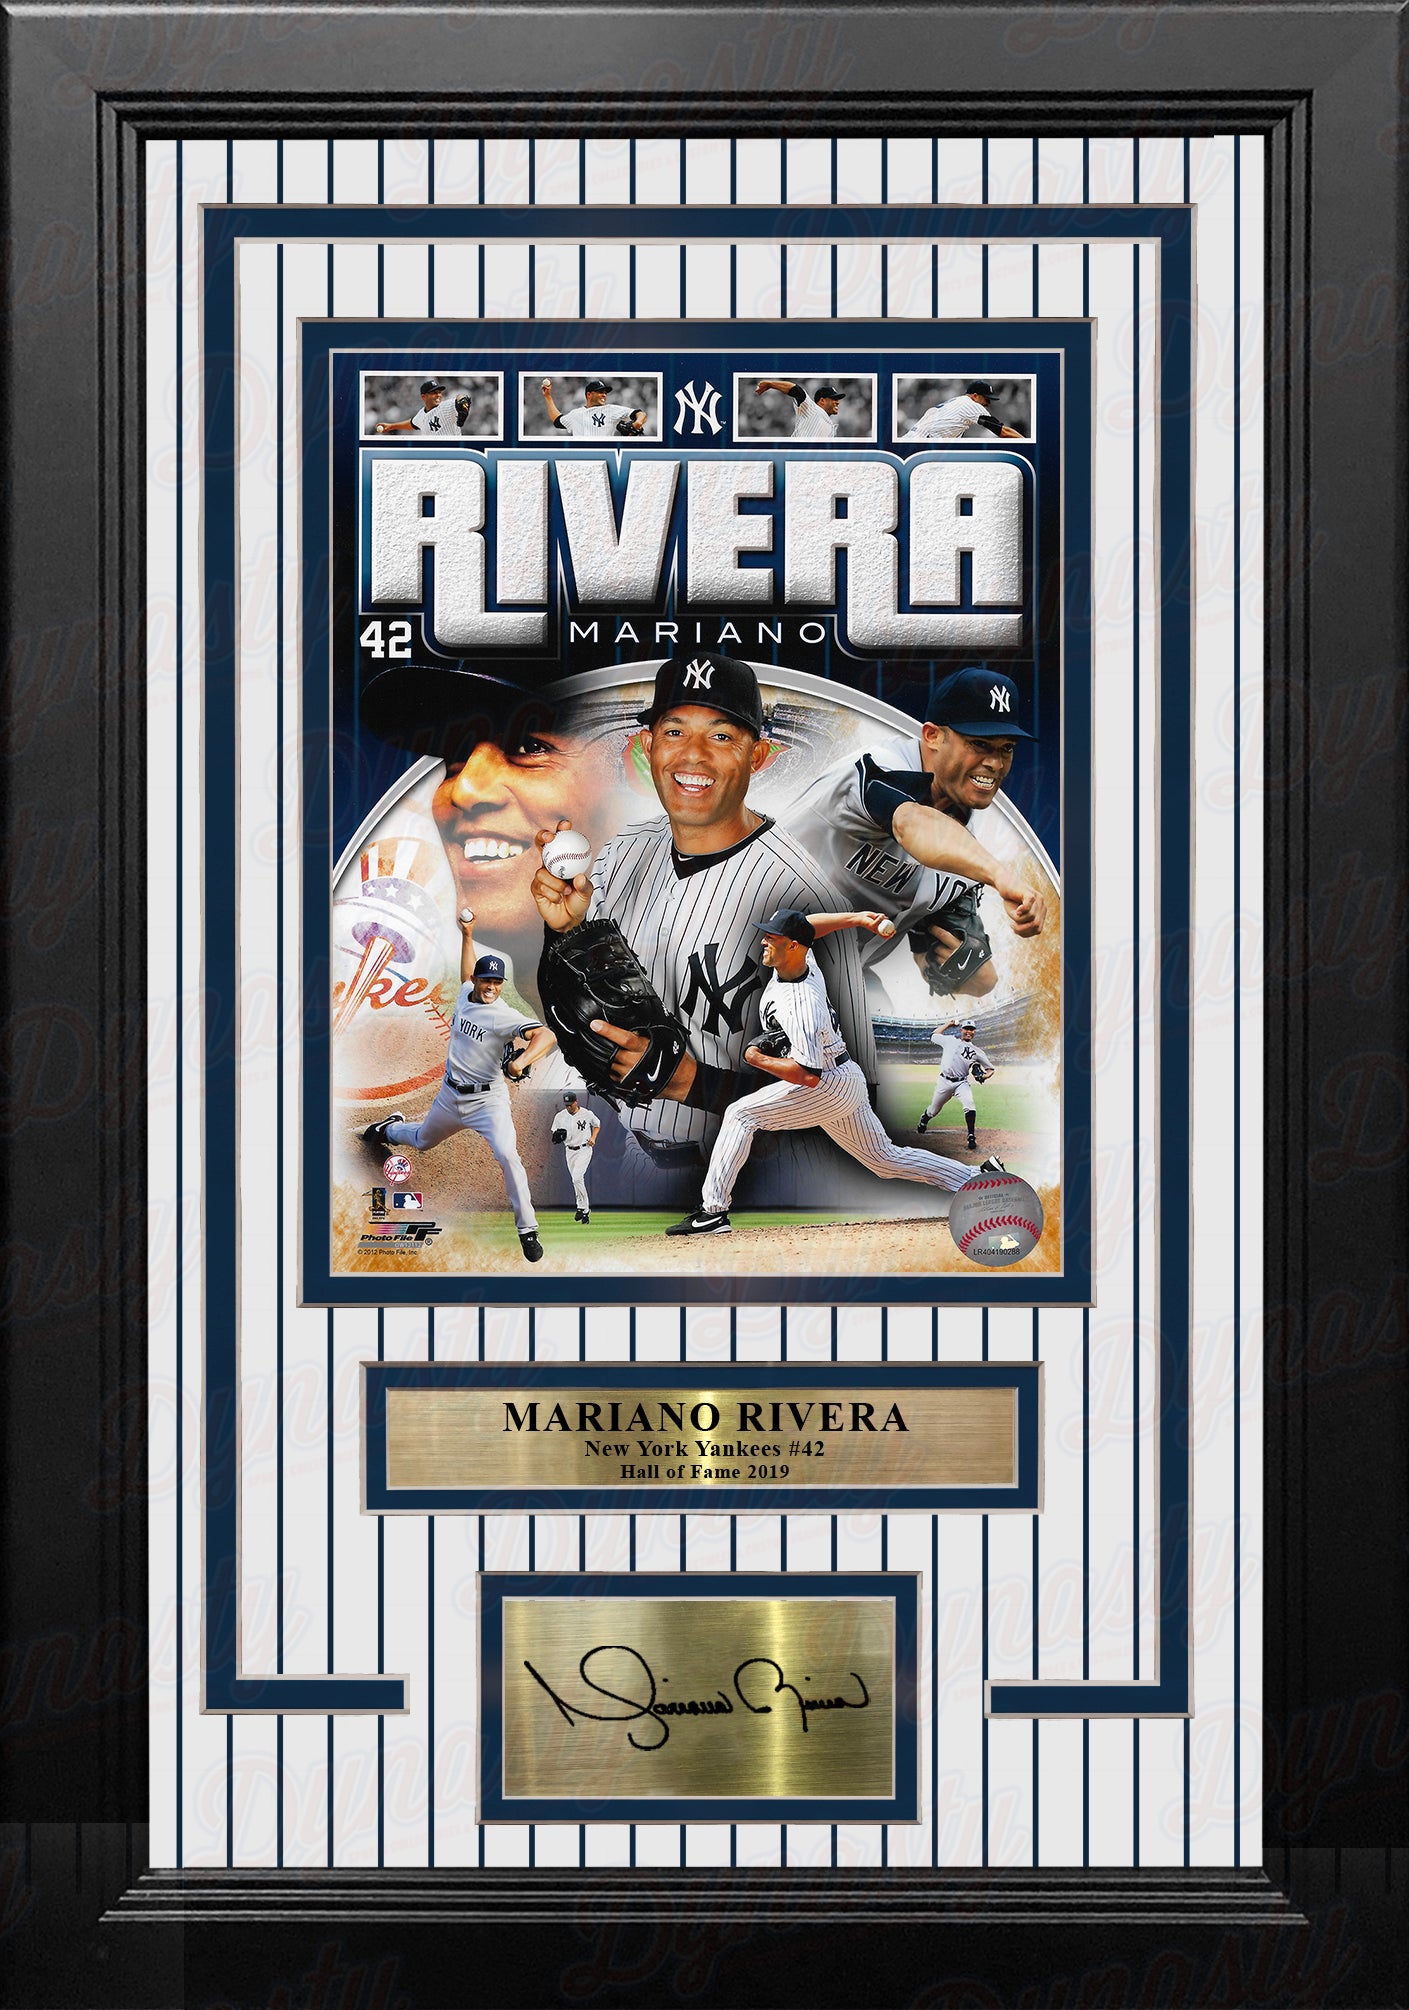 Mariano Rivera Autographed Signed Framed New York Yankees 